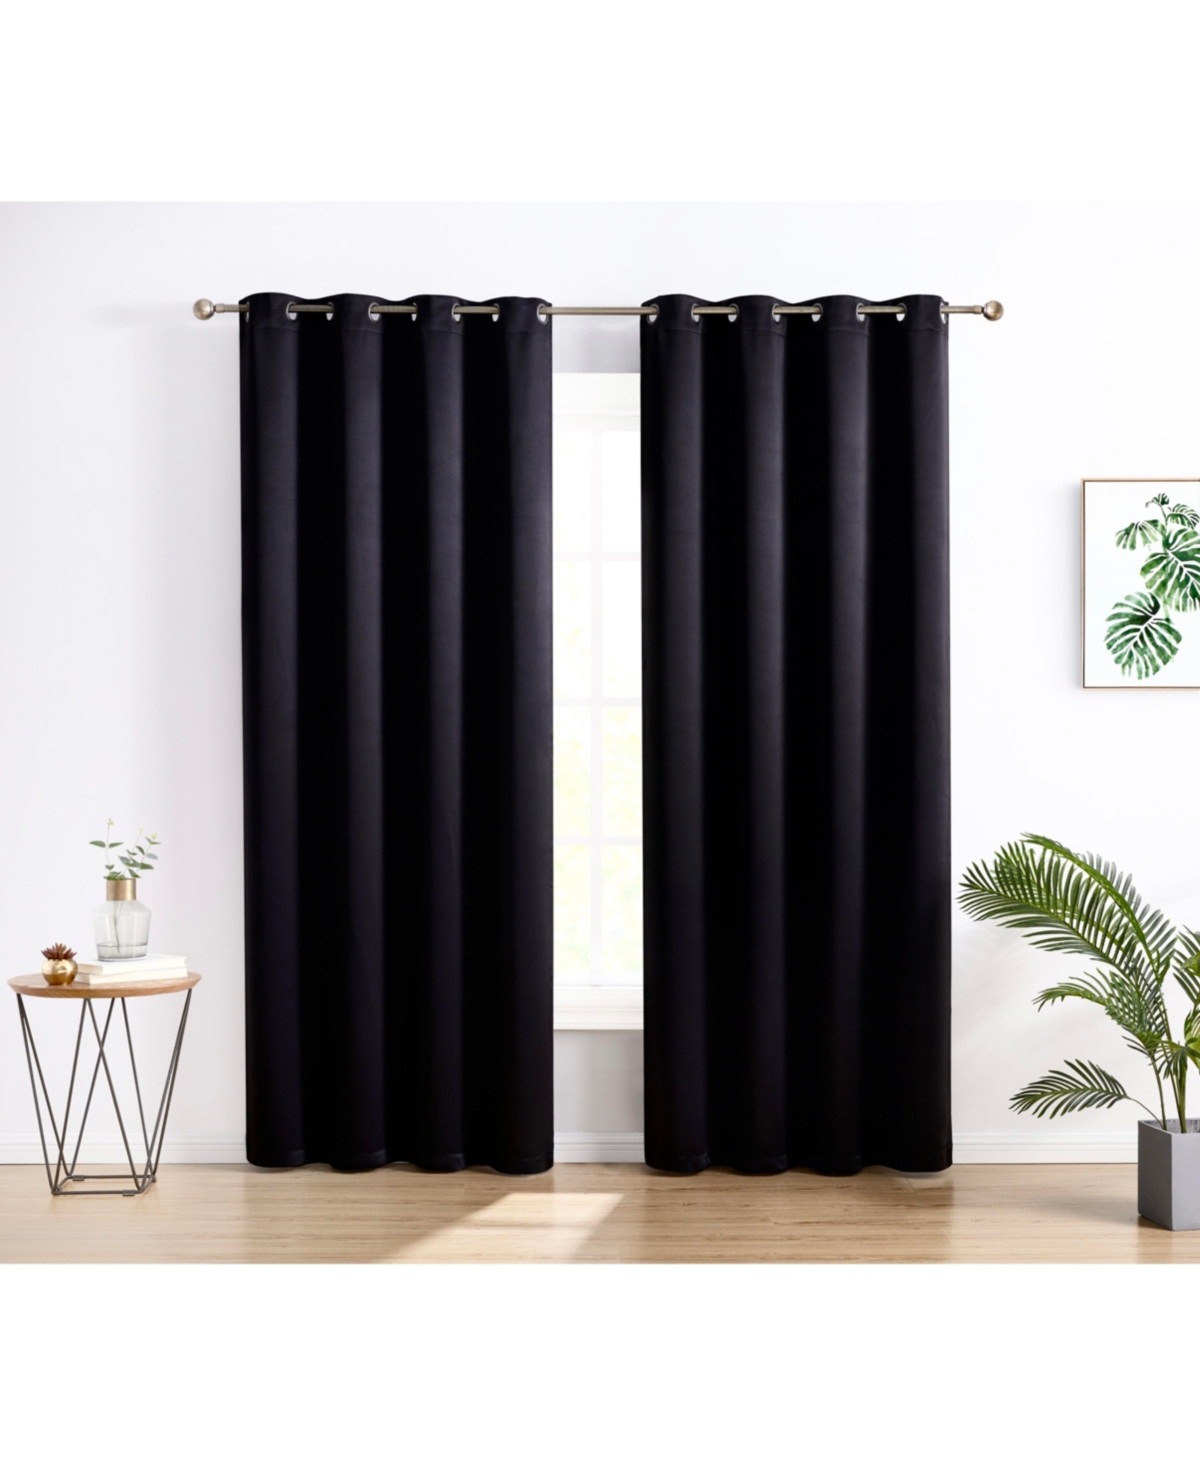 Oxford Blackout Curtains for Bedroom, Noise Reduction Thermal Insulated Window Curtain Grommet Panels, Set of 2 - Black